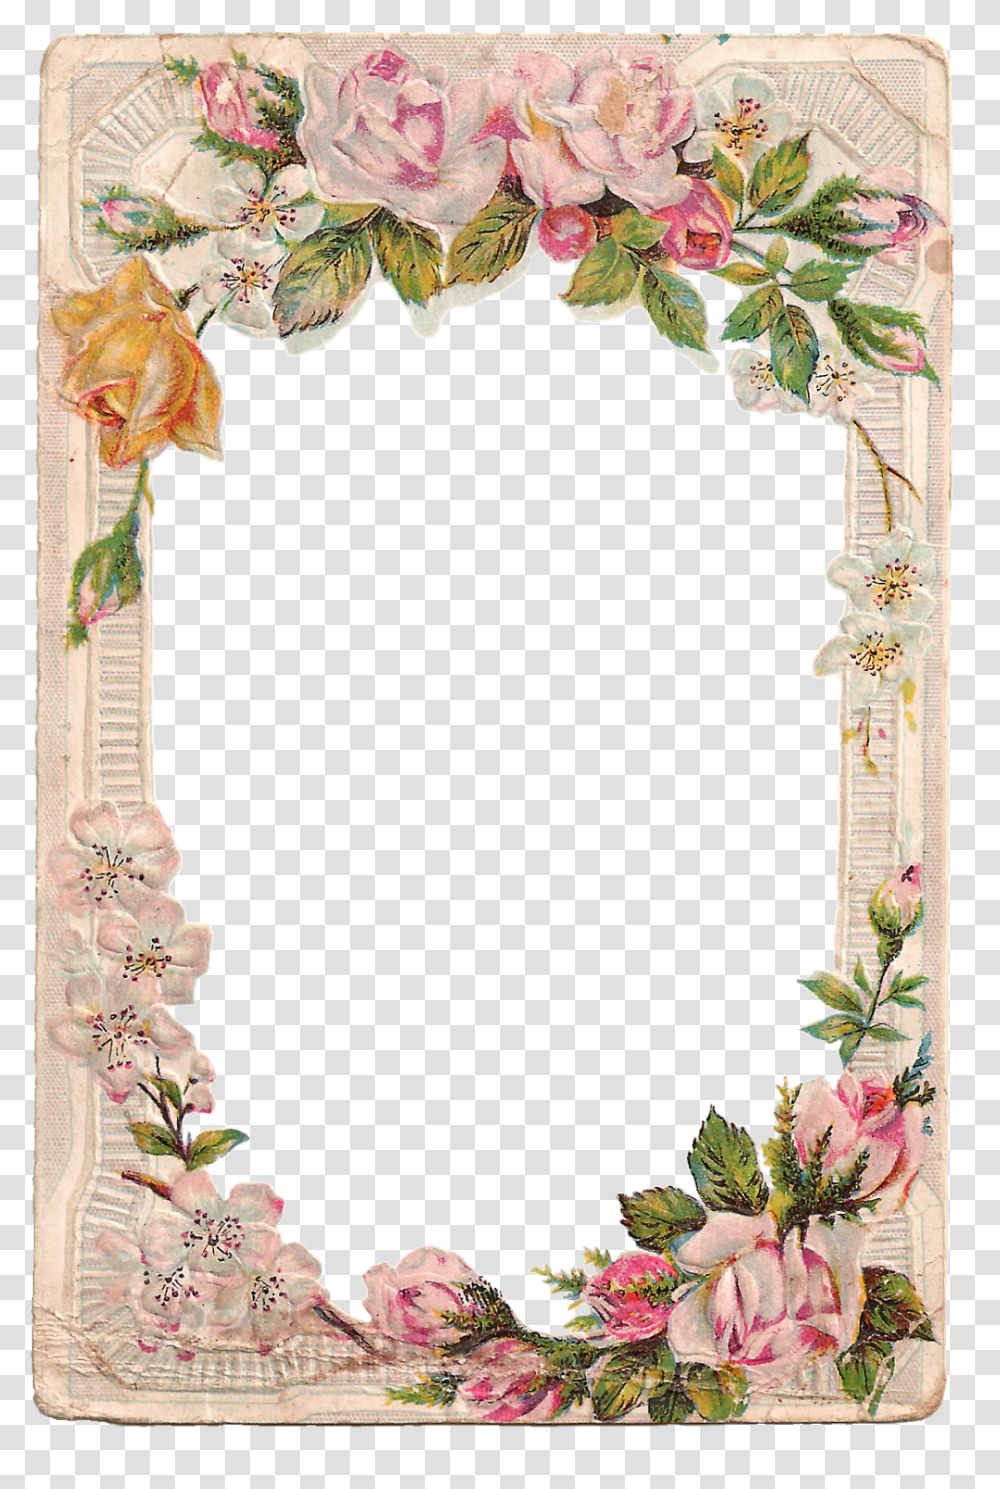 Help Your Garden Grow With These Simple Tips Flower Frame Flower Design Borders And Frames, Mirror, Painting, Art, Oval Transparent Png